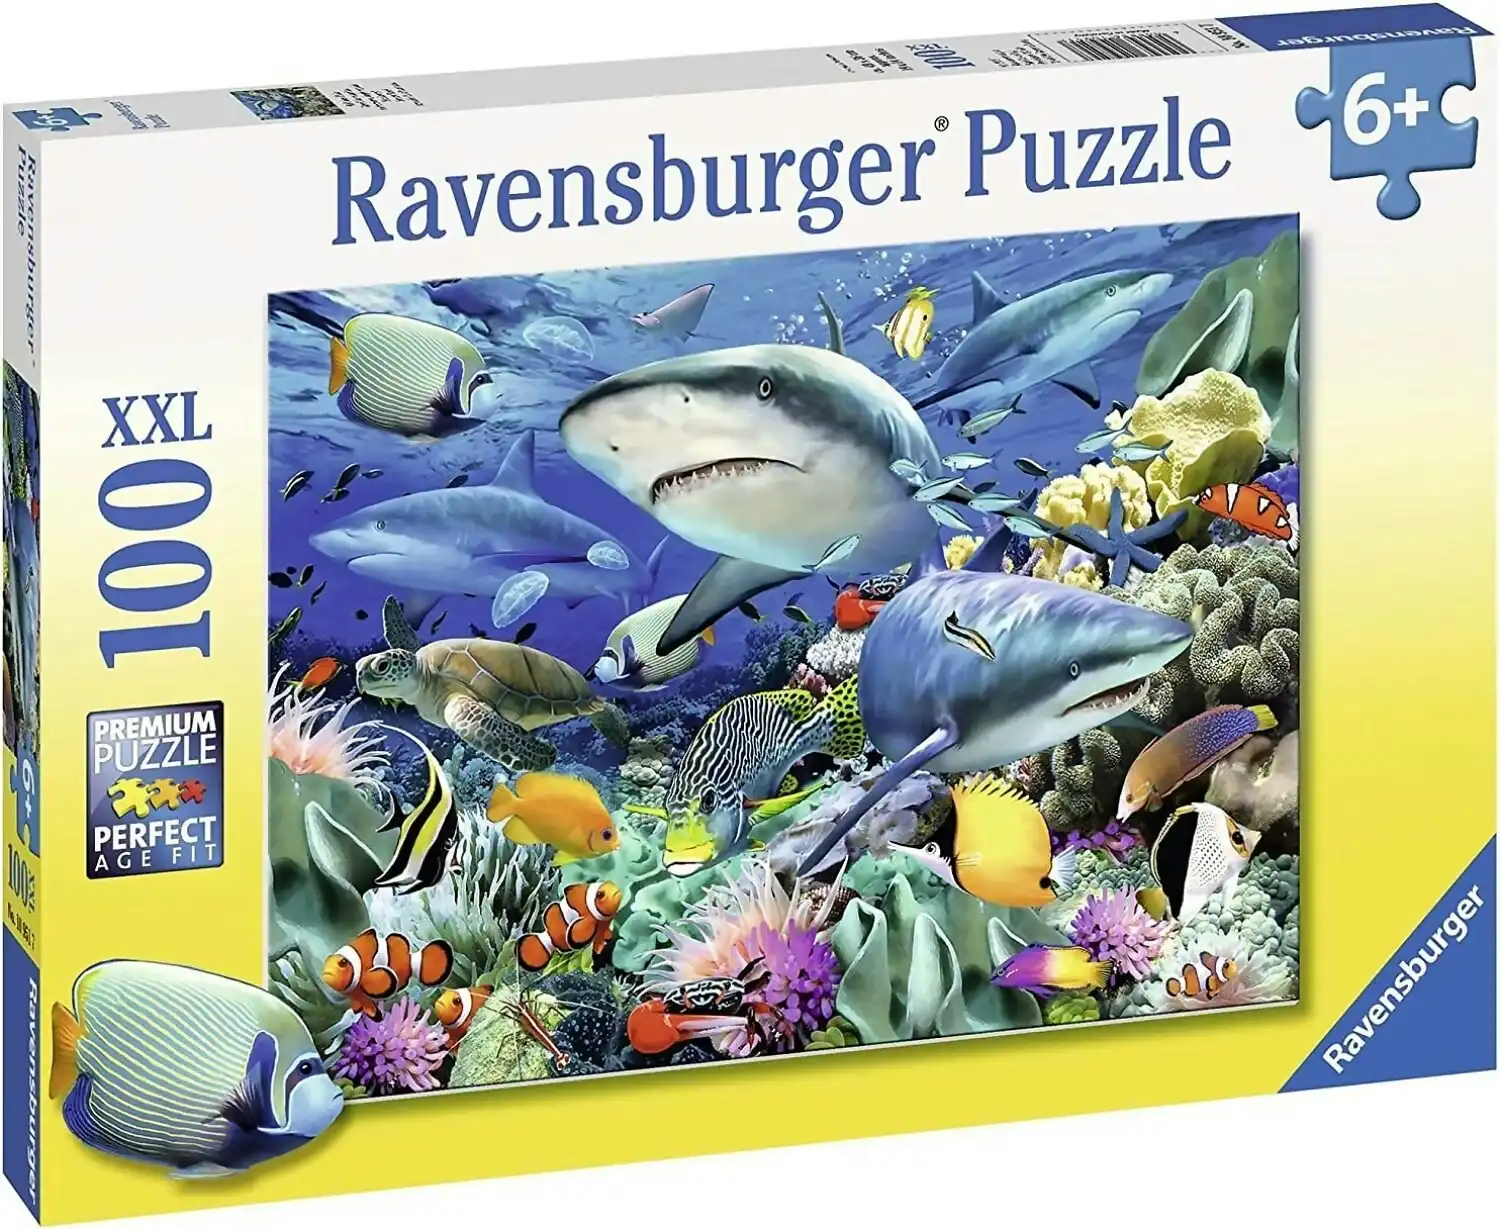 Ravensburger - Reef Of The Sharks Jigsaw Puzzle Xxl 100 Pieces